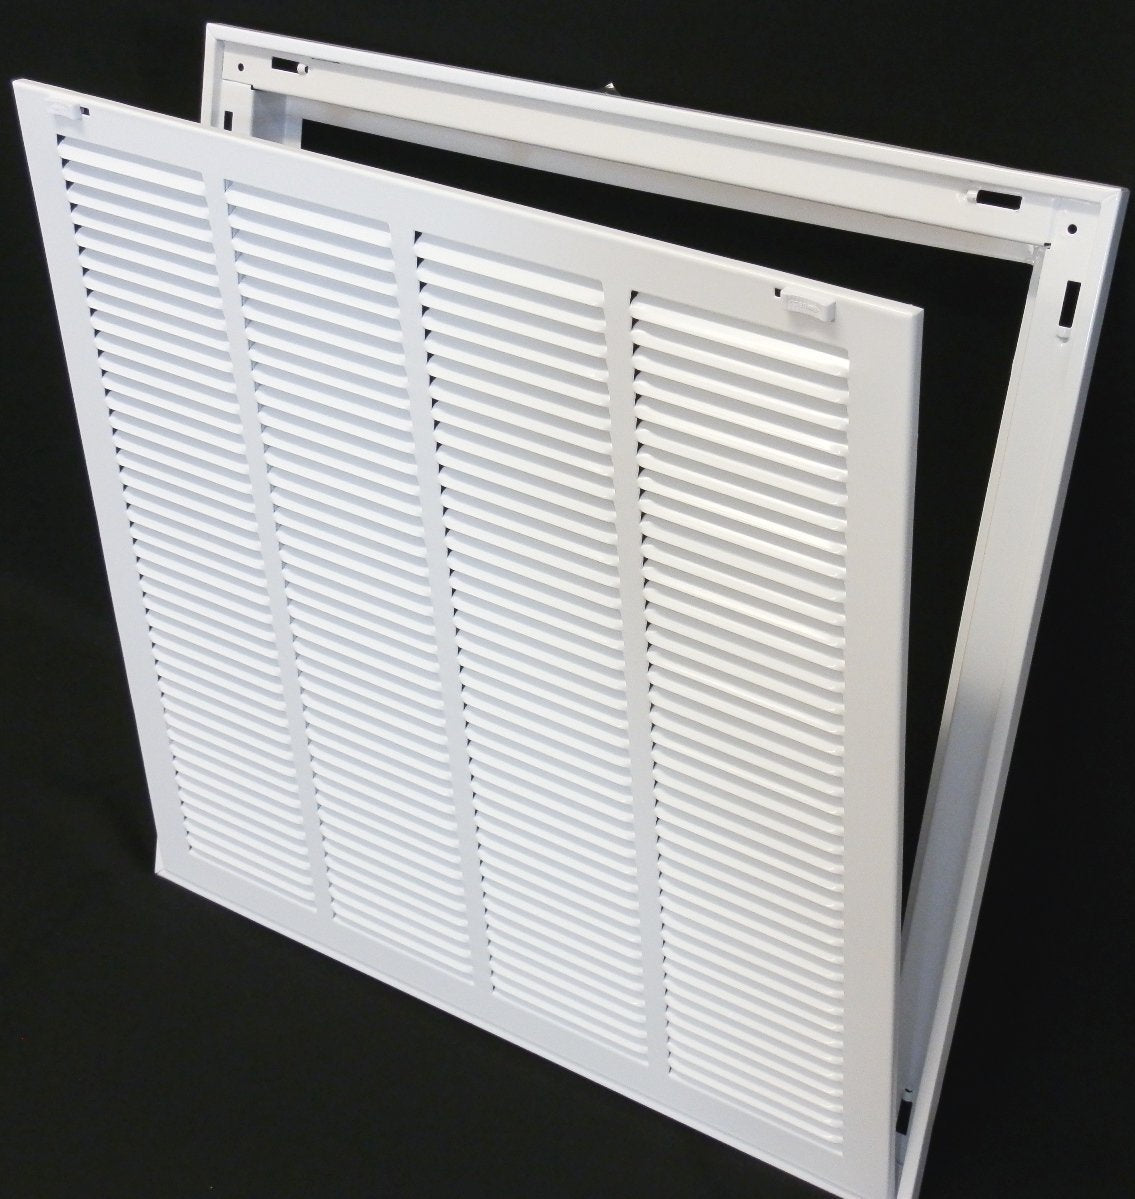 34&quot; X 30&quot; Steel Return Air Filter Grille for 1&quot; Filter - Removable Frame - [Outer Dimensions: 36 5/8&quot; X 32 5/8&quot;]